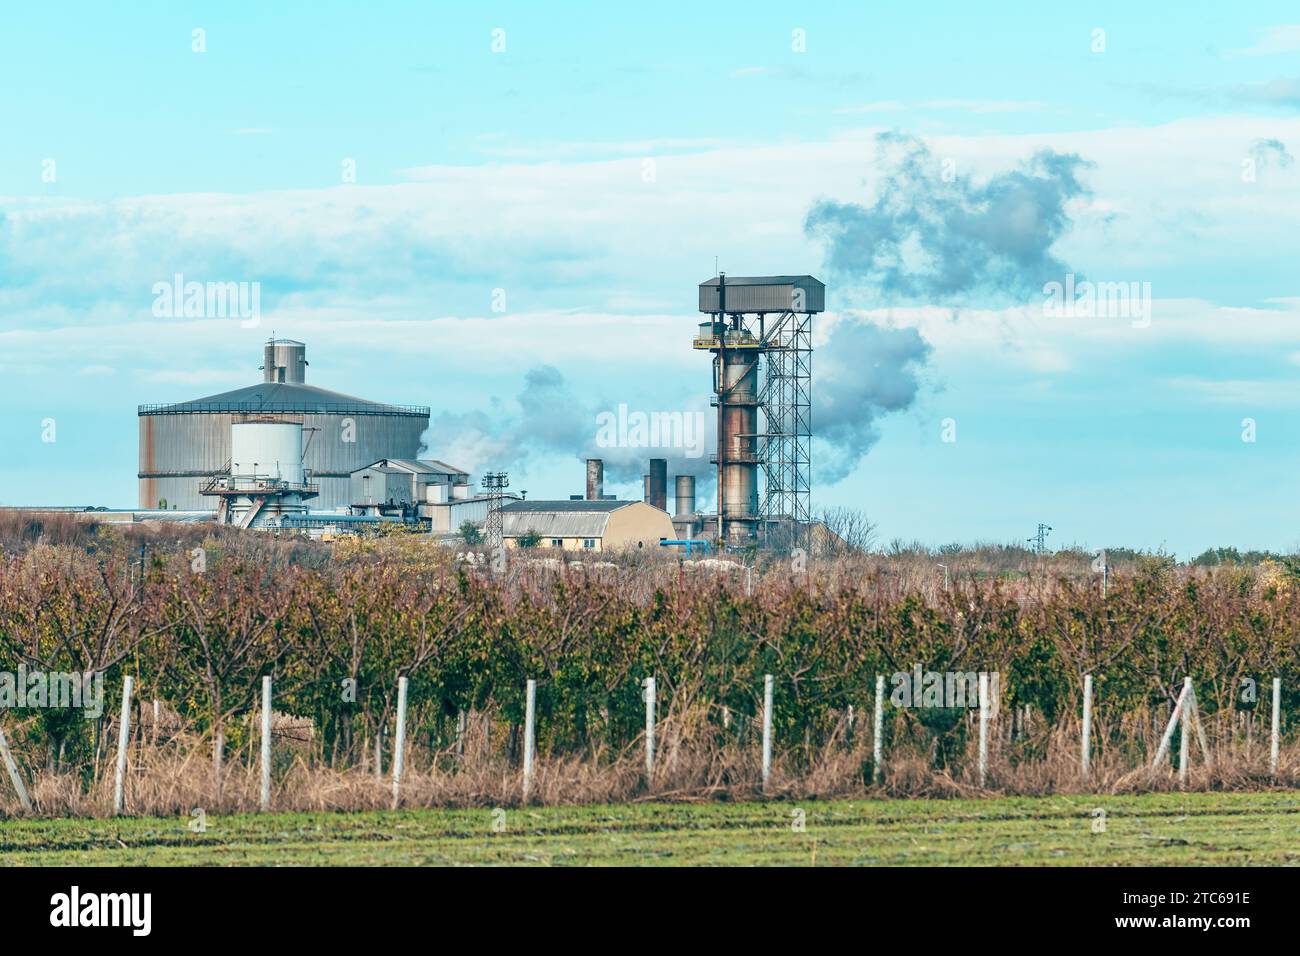 Sugar beet processing plant, old building and white smoke from smokestack in autumn morning Stock Photo